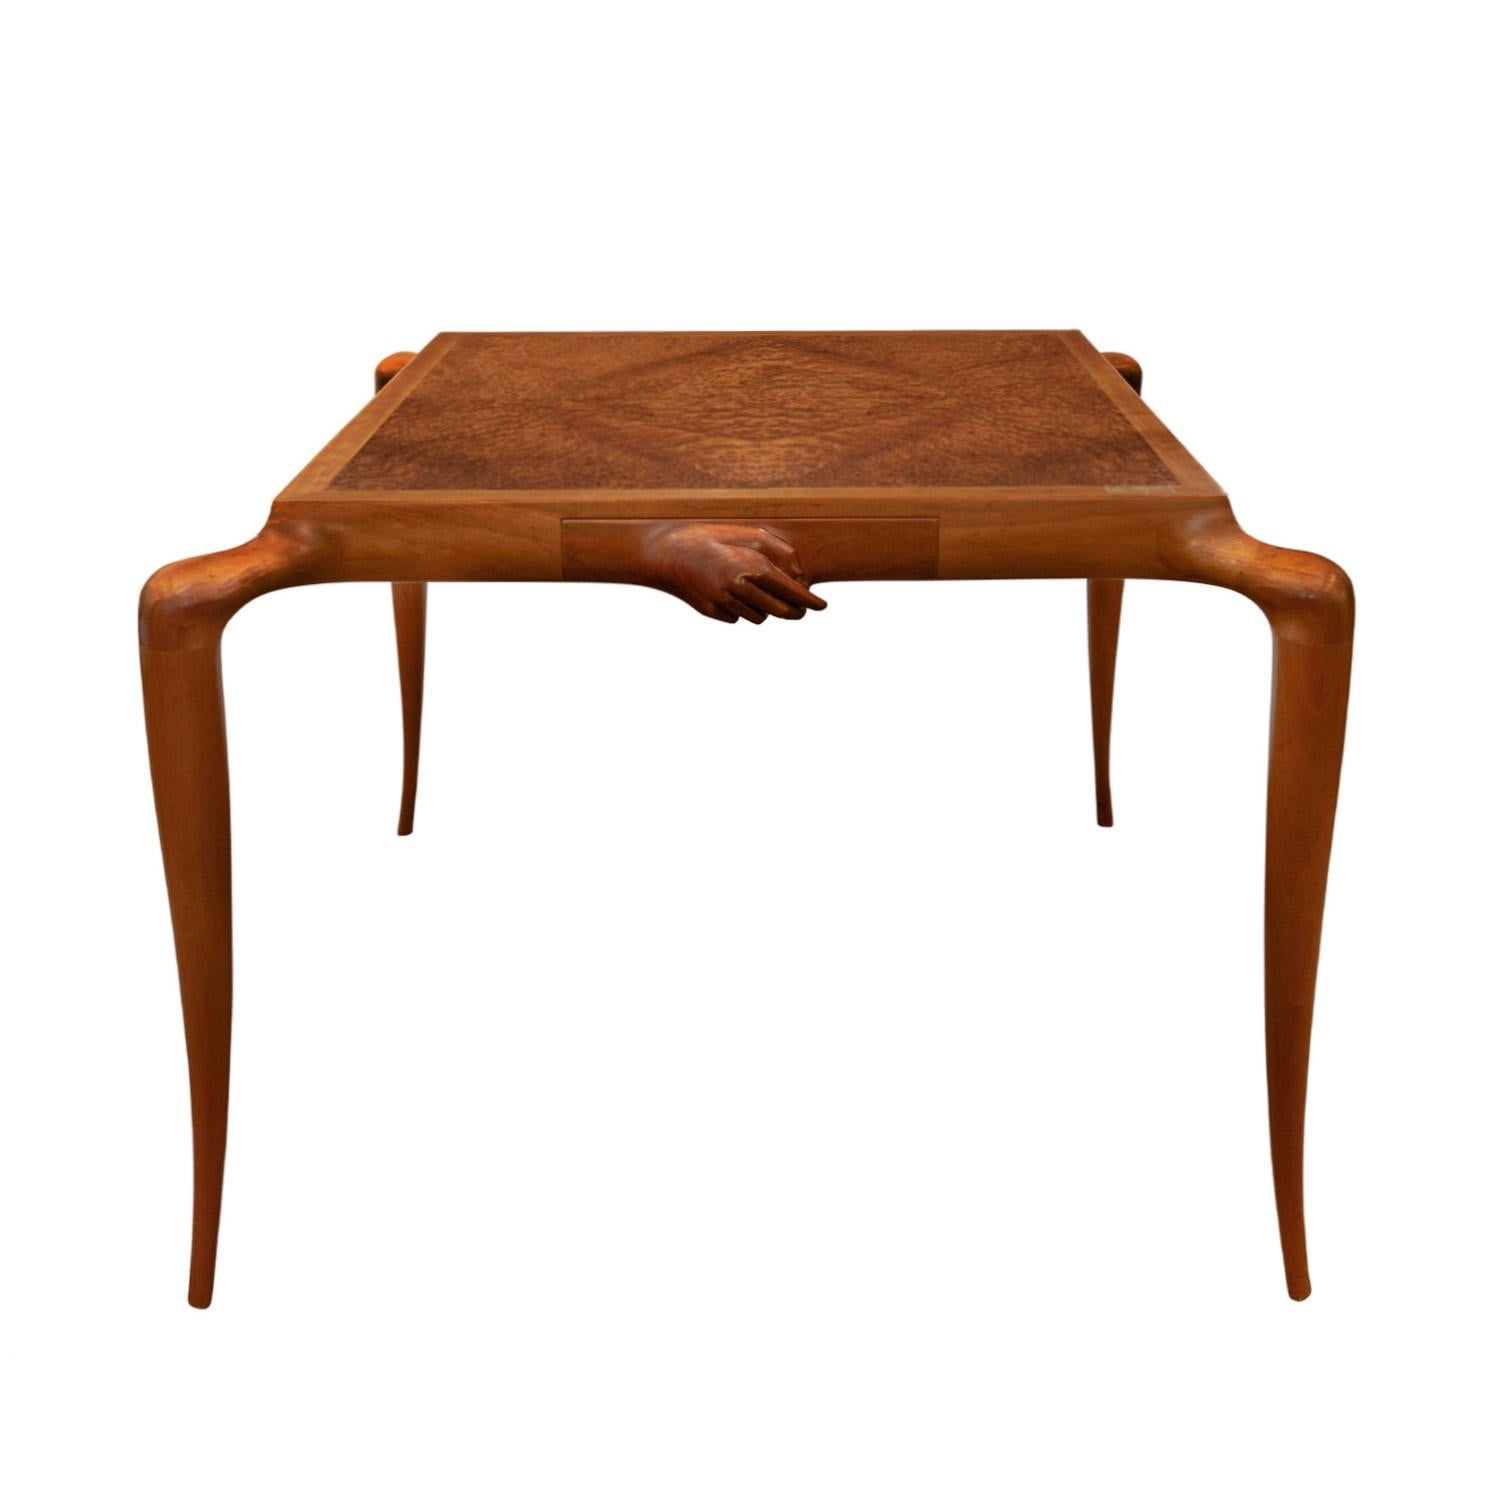 One-of-a-kind sculpture game table in teak with book-matched Carpathian elm top with 2 drawers on opposite sides, each with a carved articulated hand over it, by Philip LaVerne, American 1966 (signed on top “Philip LaVerne”). The sculpted tapering